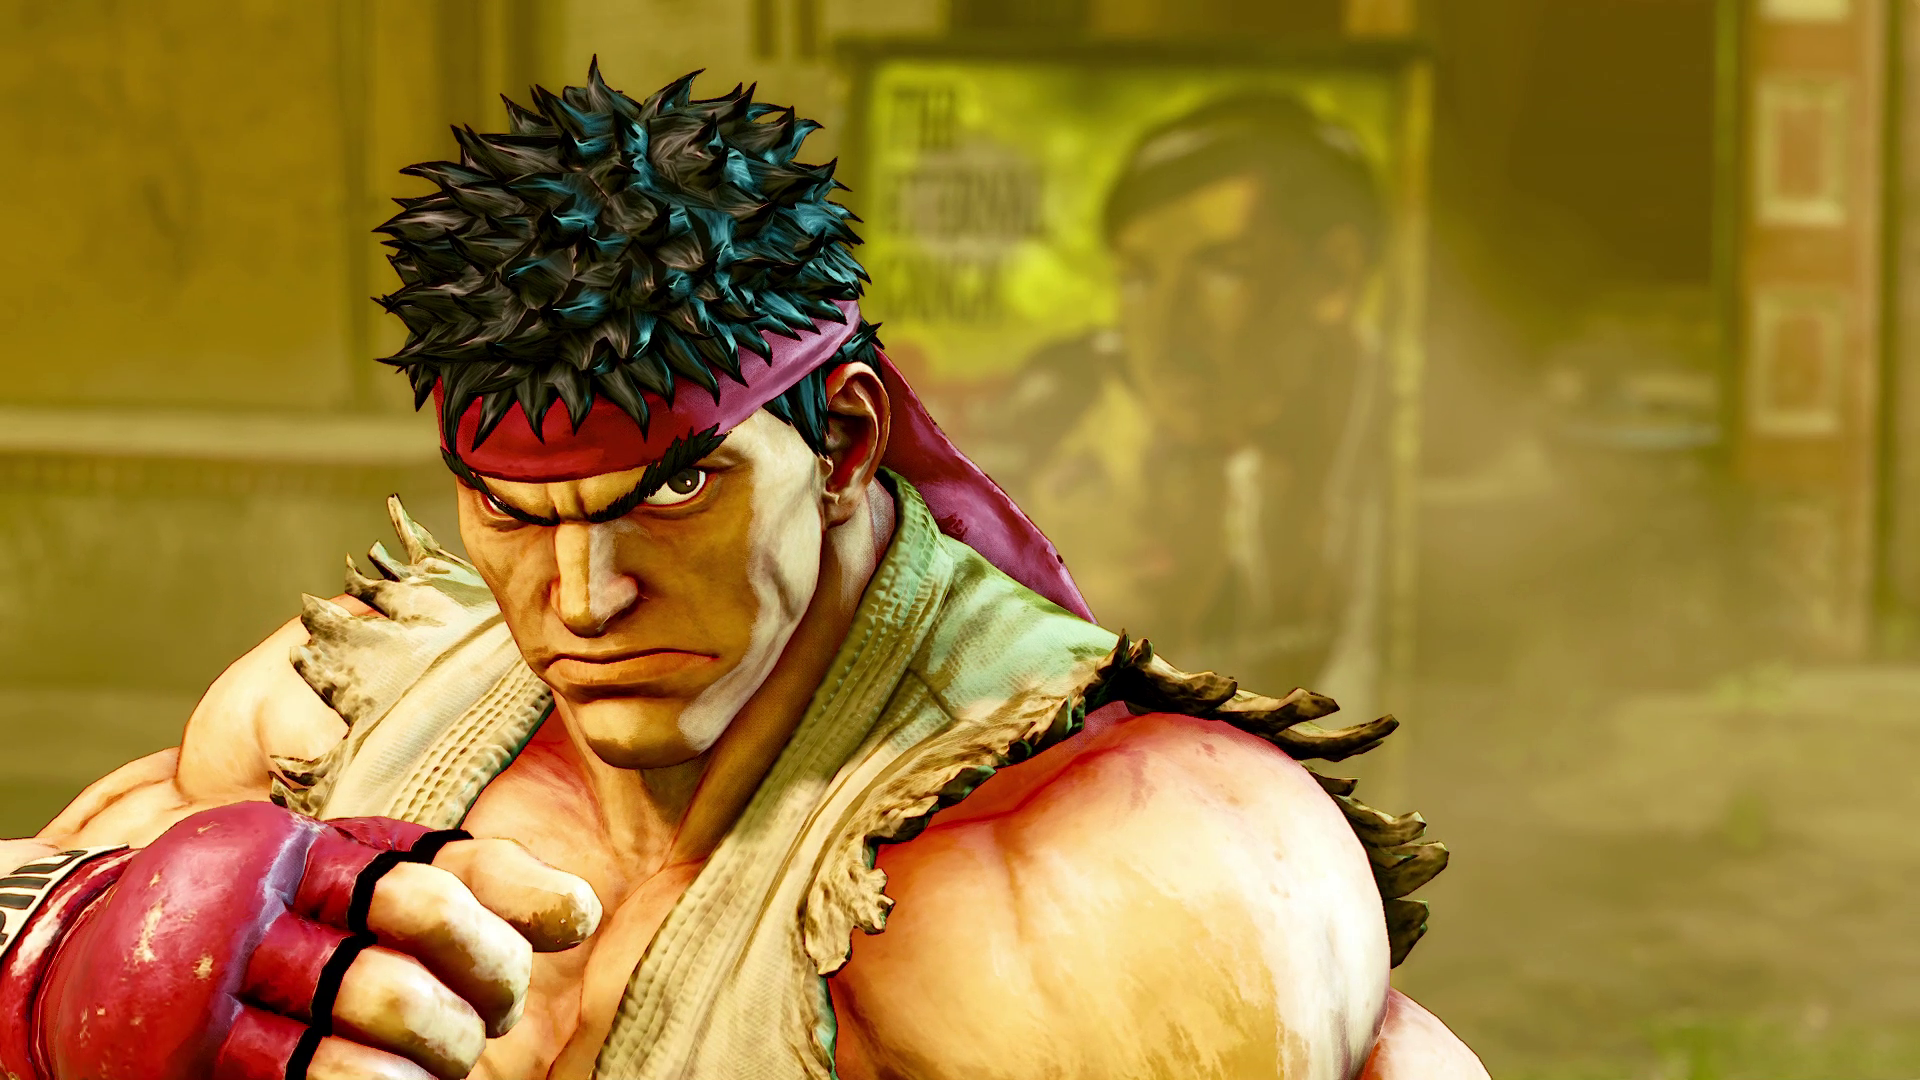 &#039;Street Fighter V&#039; creator says his game is meant for pros and noobs alike